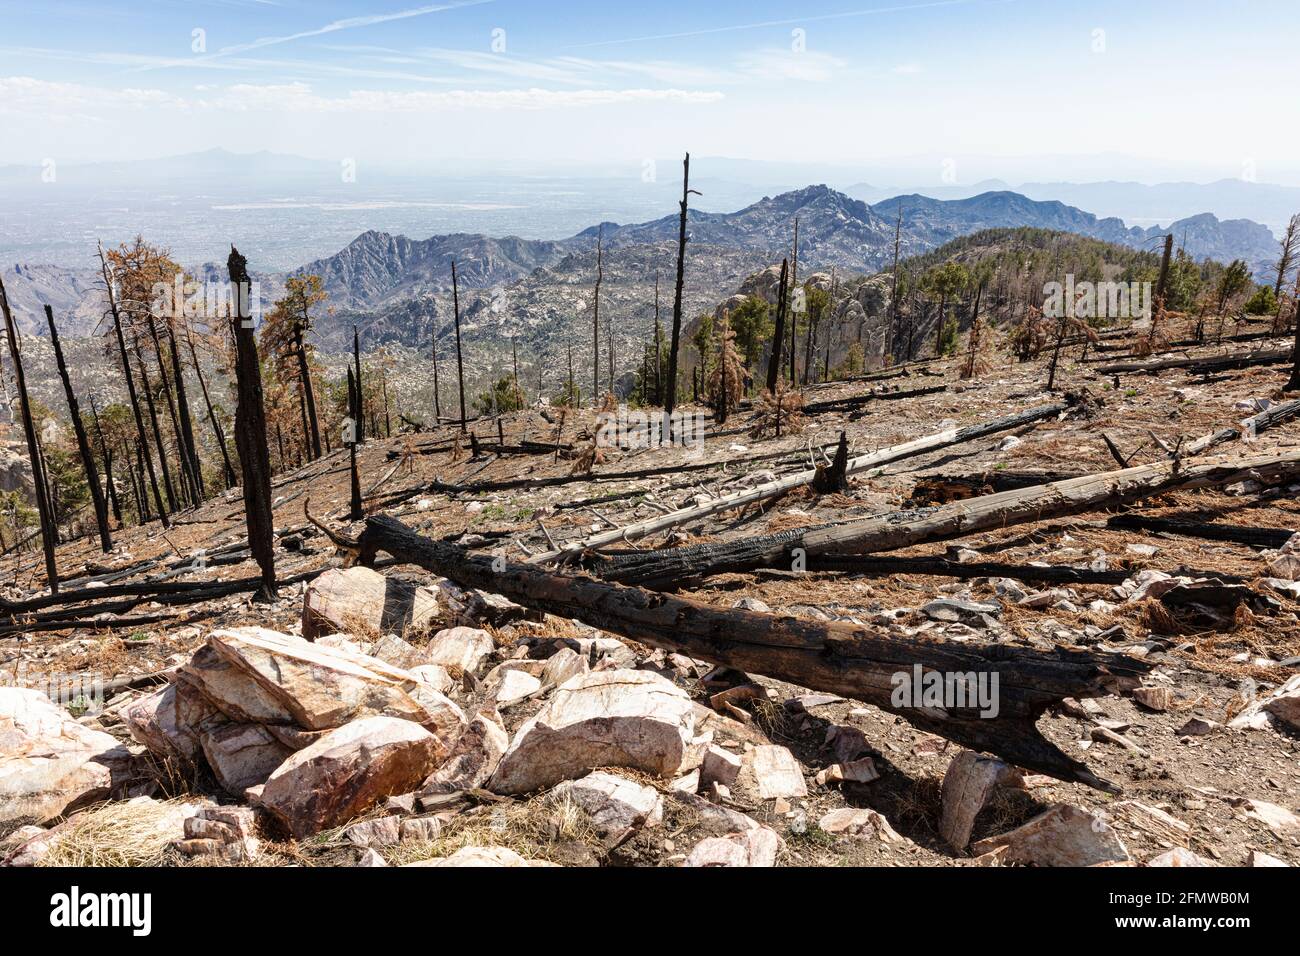 Burnt trees in decimated forest atop Mt. Lemmon, Santa Catalina Mountains, near Tucson (in the distance), Arizona. Stock Photo